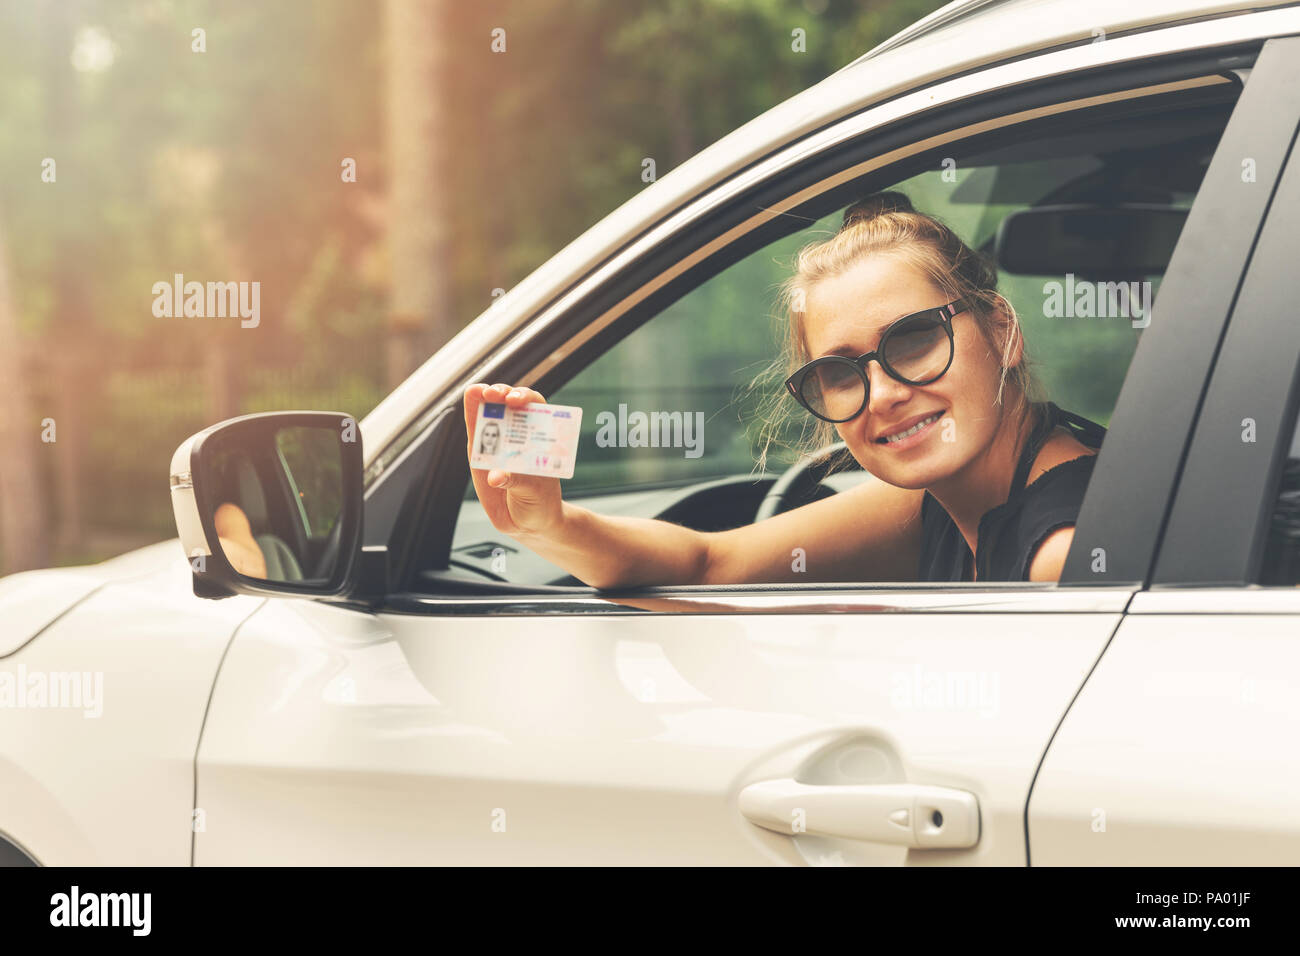 smiling attractive woman showing her driver license out of car window Stock Photo